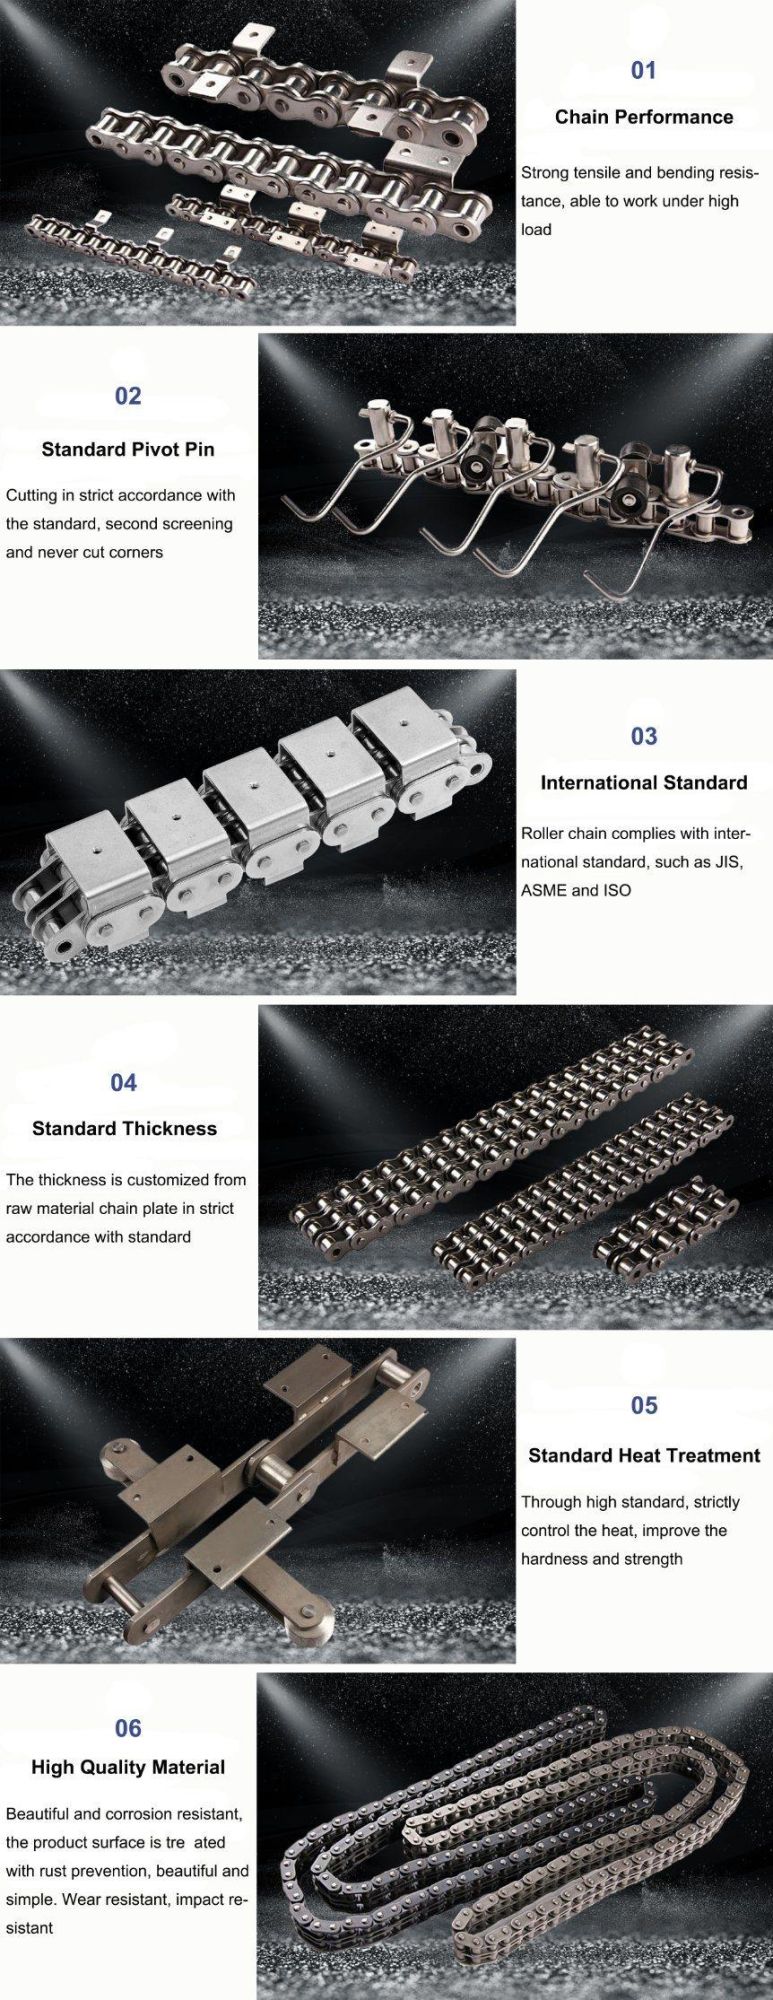 Conveyor Chain Manufacturer 81X 81xh 81xhe 81xf14 Lumber Conveyor Roller Chain and Attachments